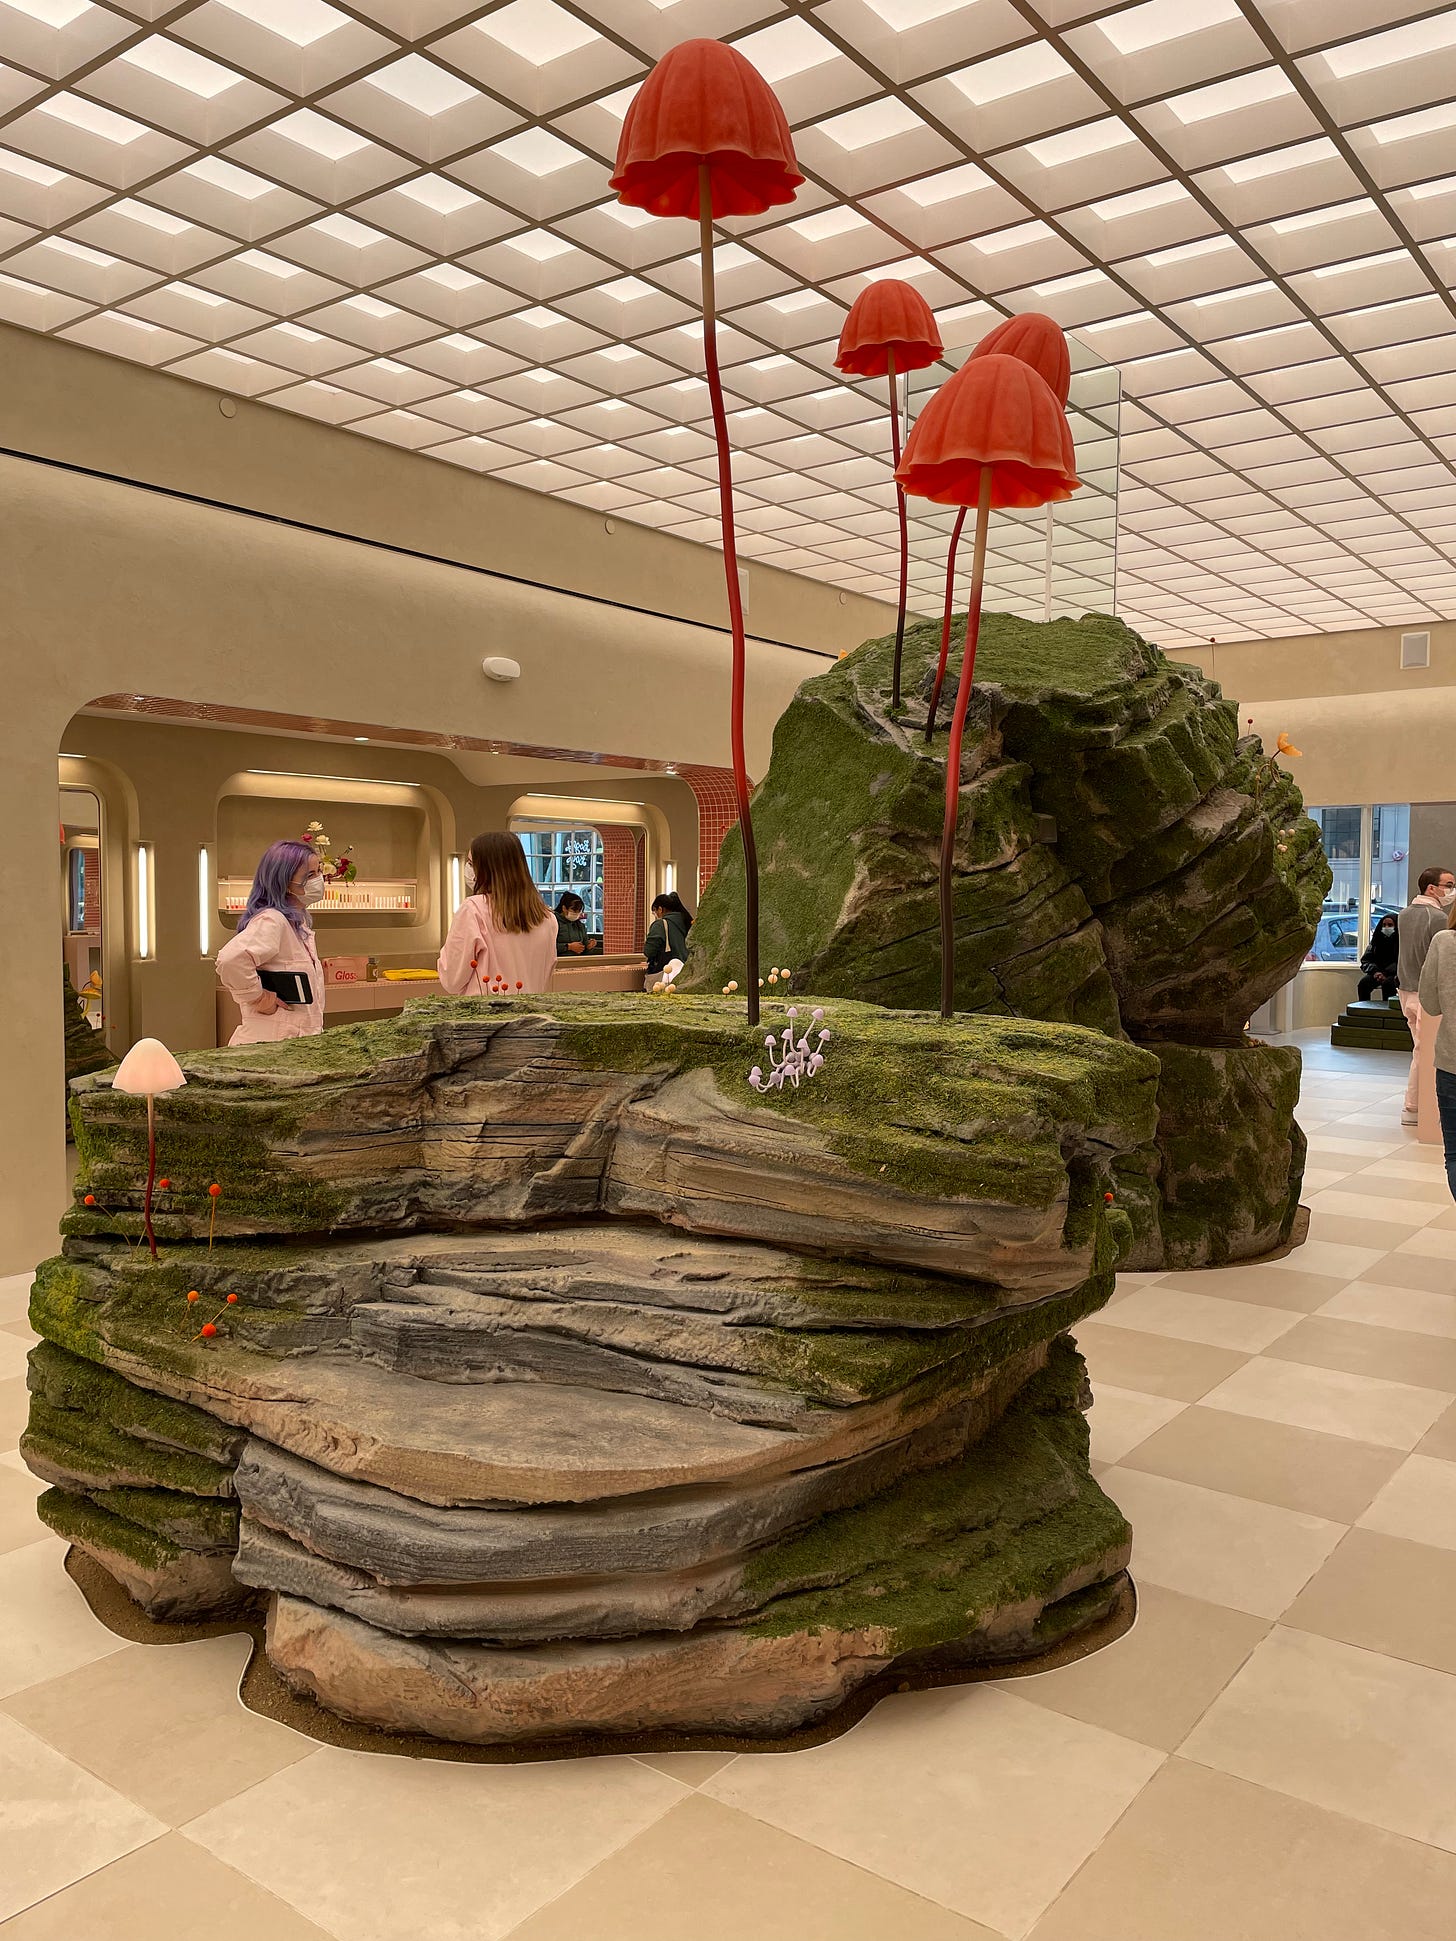 Display in Glossier store that looks like red mushrooms on top of mossy rocks